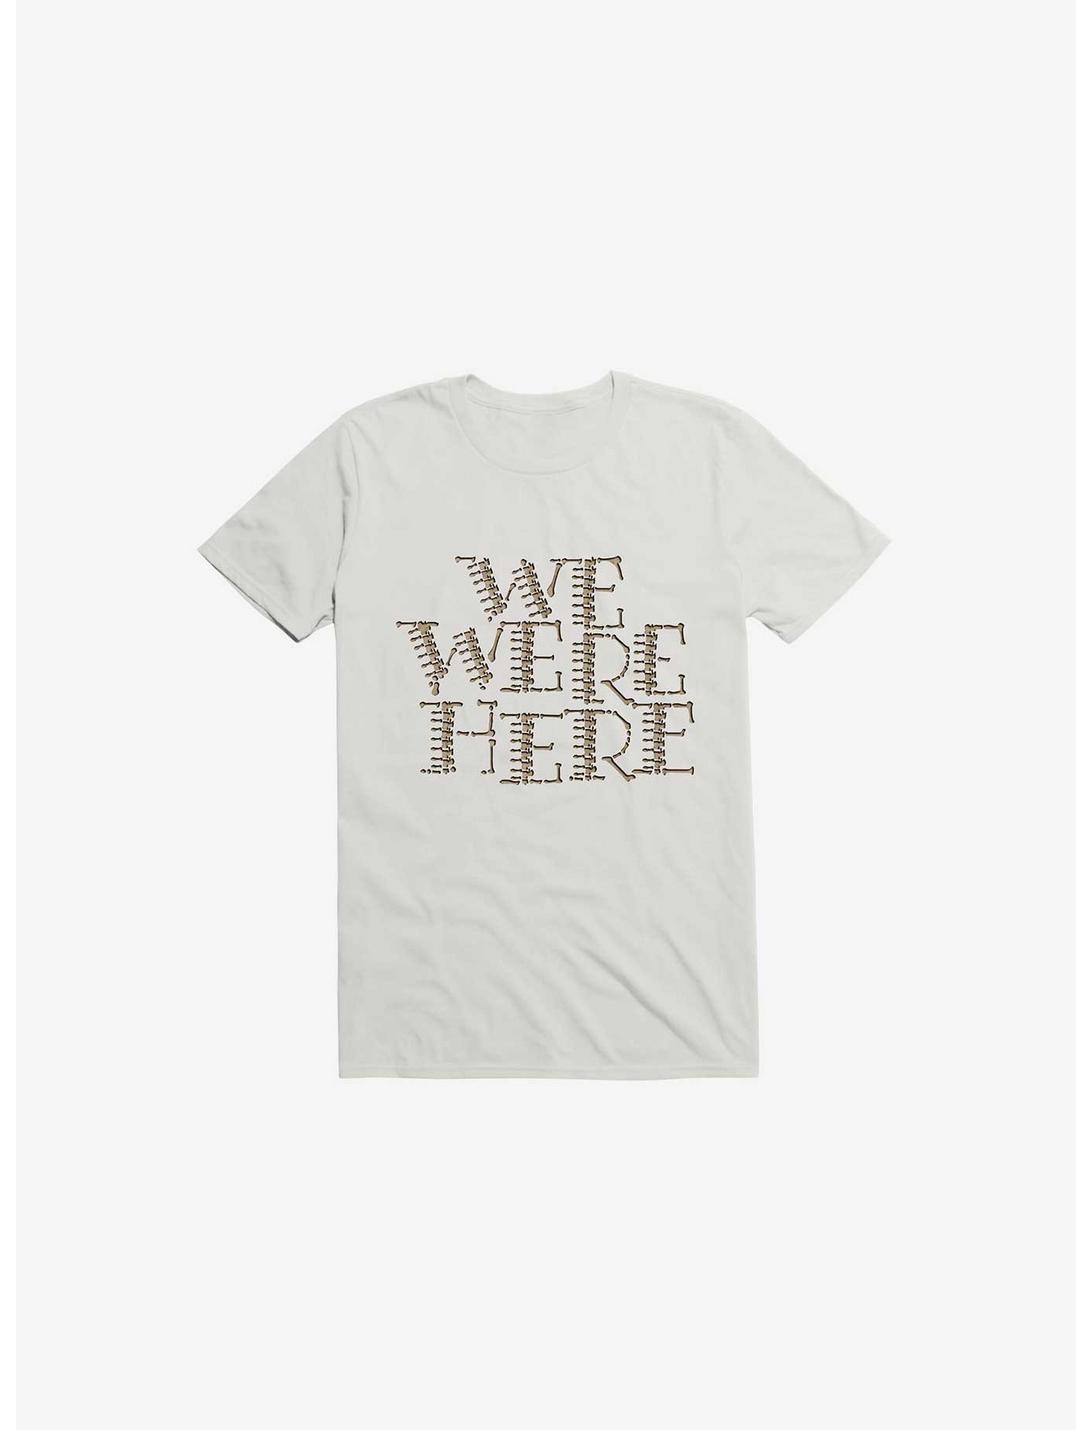 We Were Here T-Shirt, WHITE, hi-res